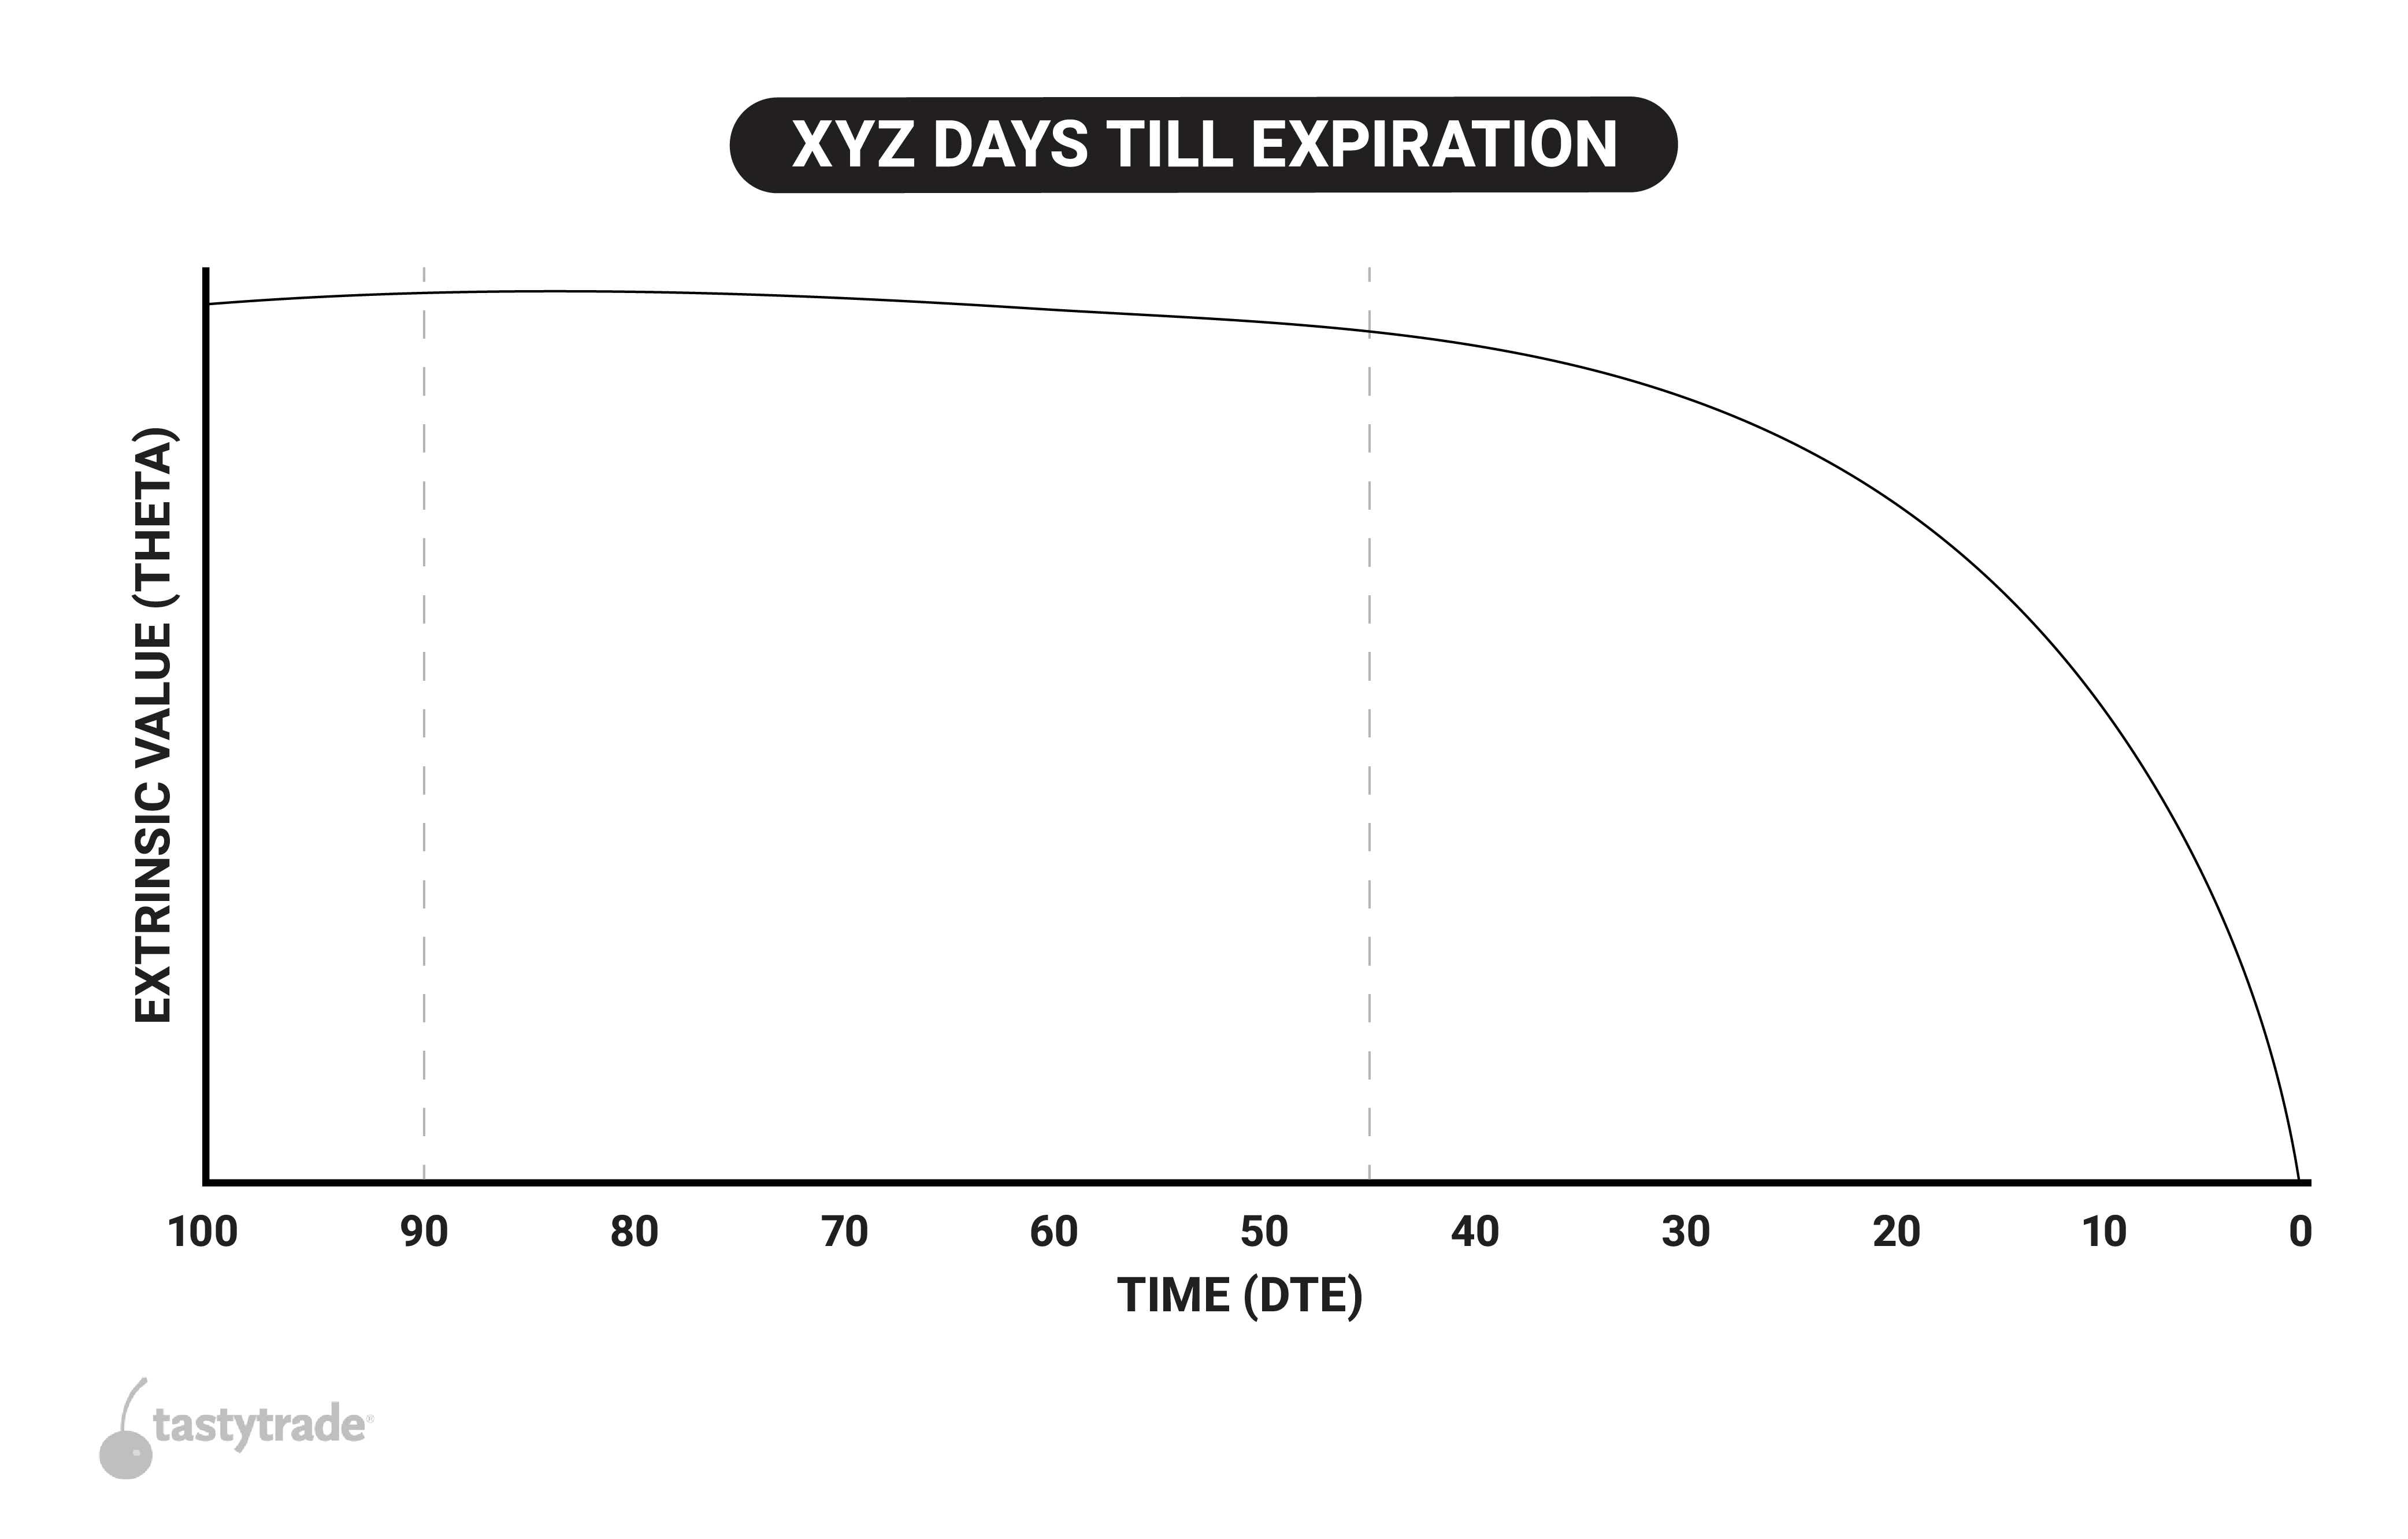 Company's days till expiration shown in a chart